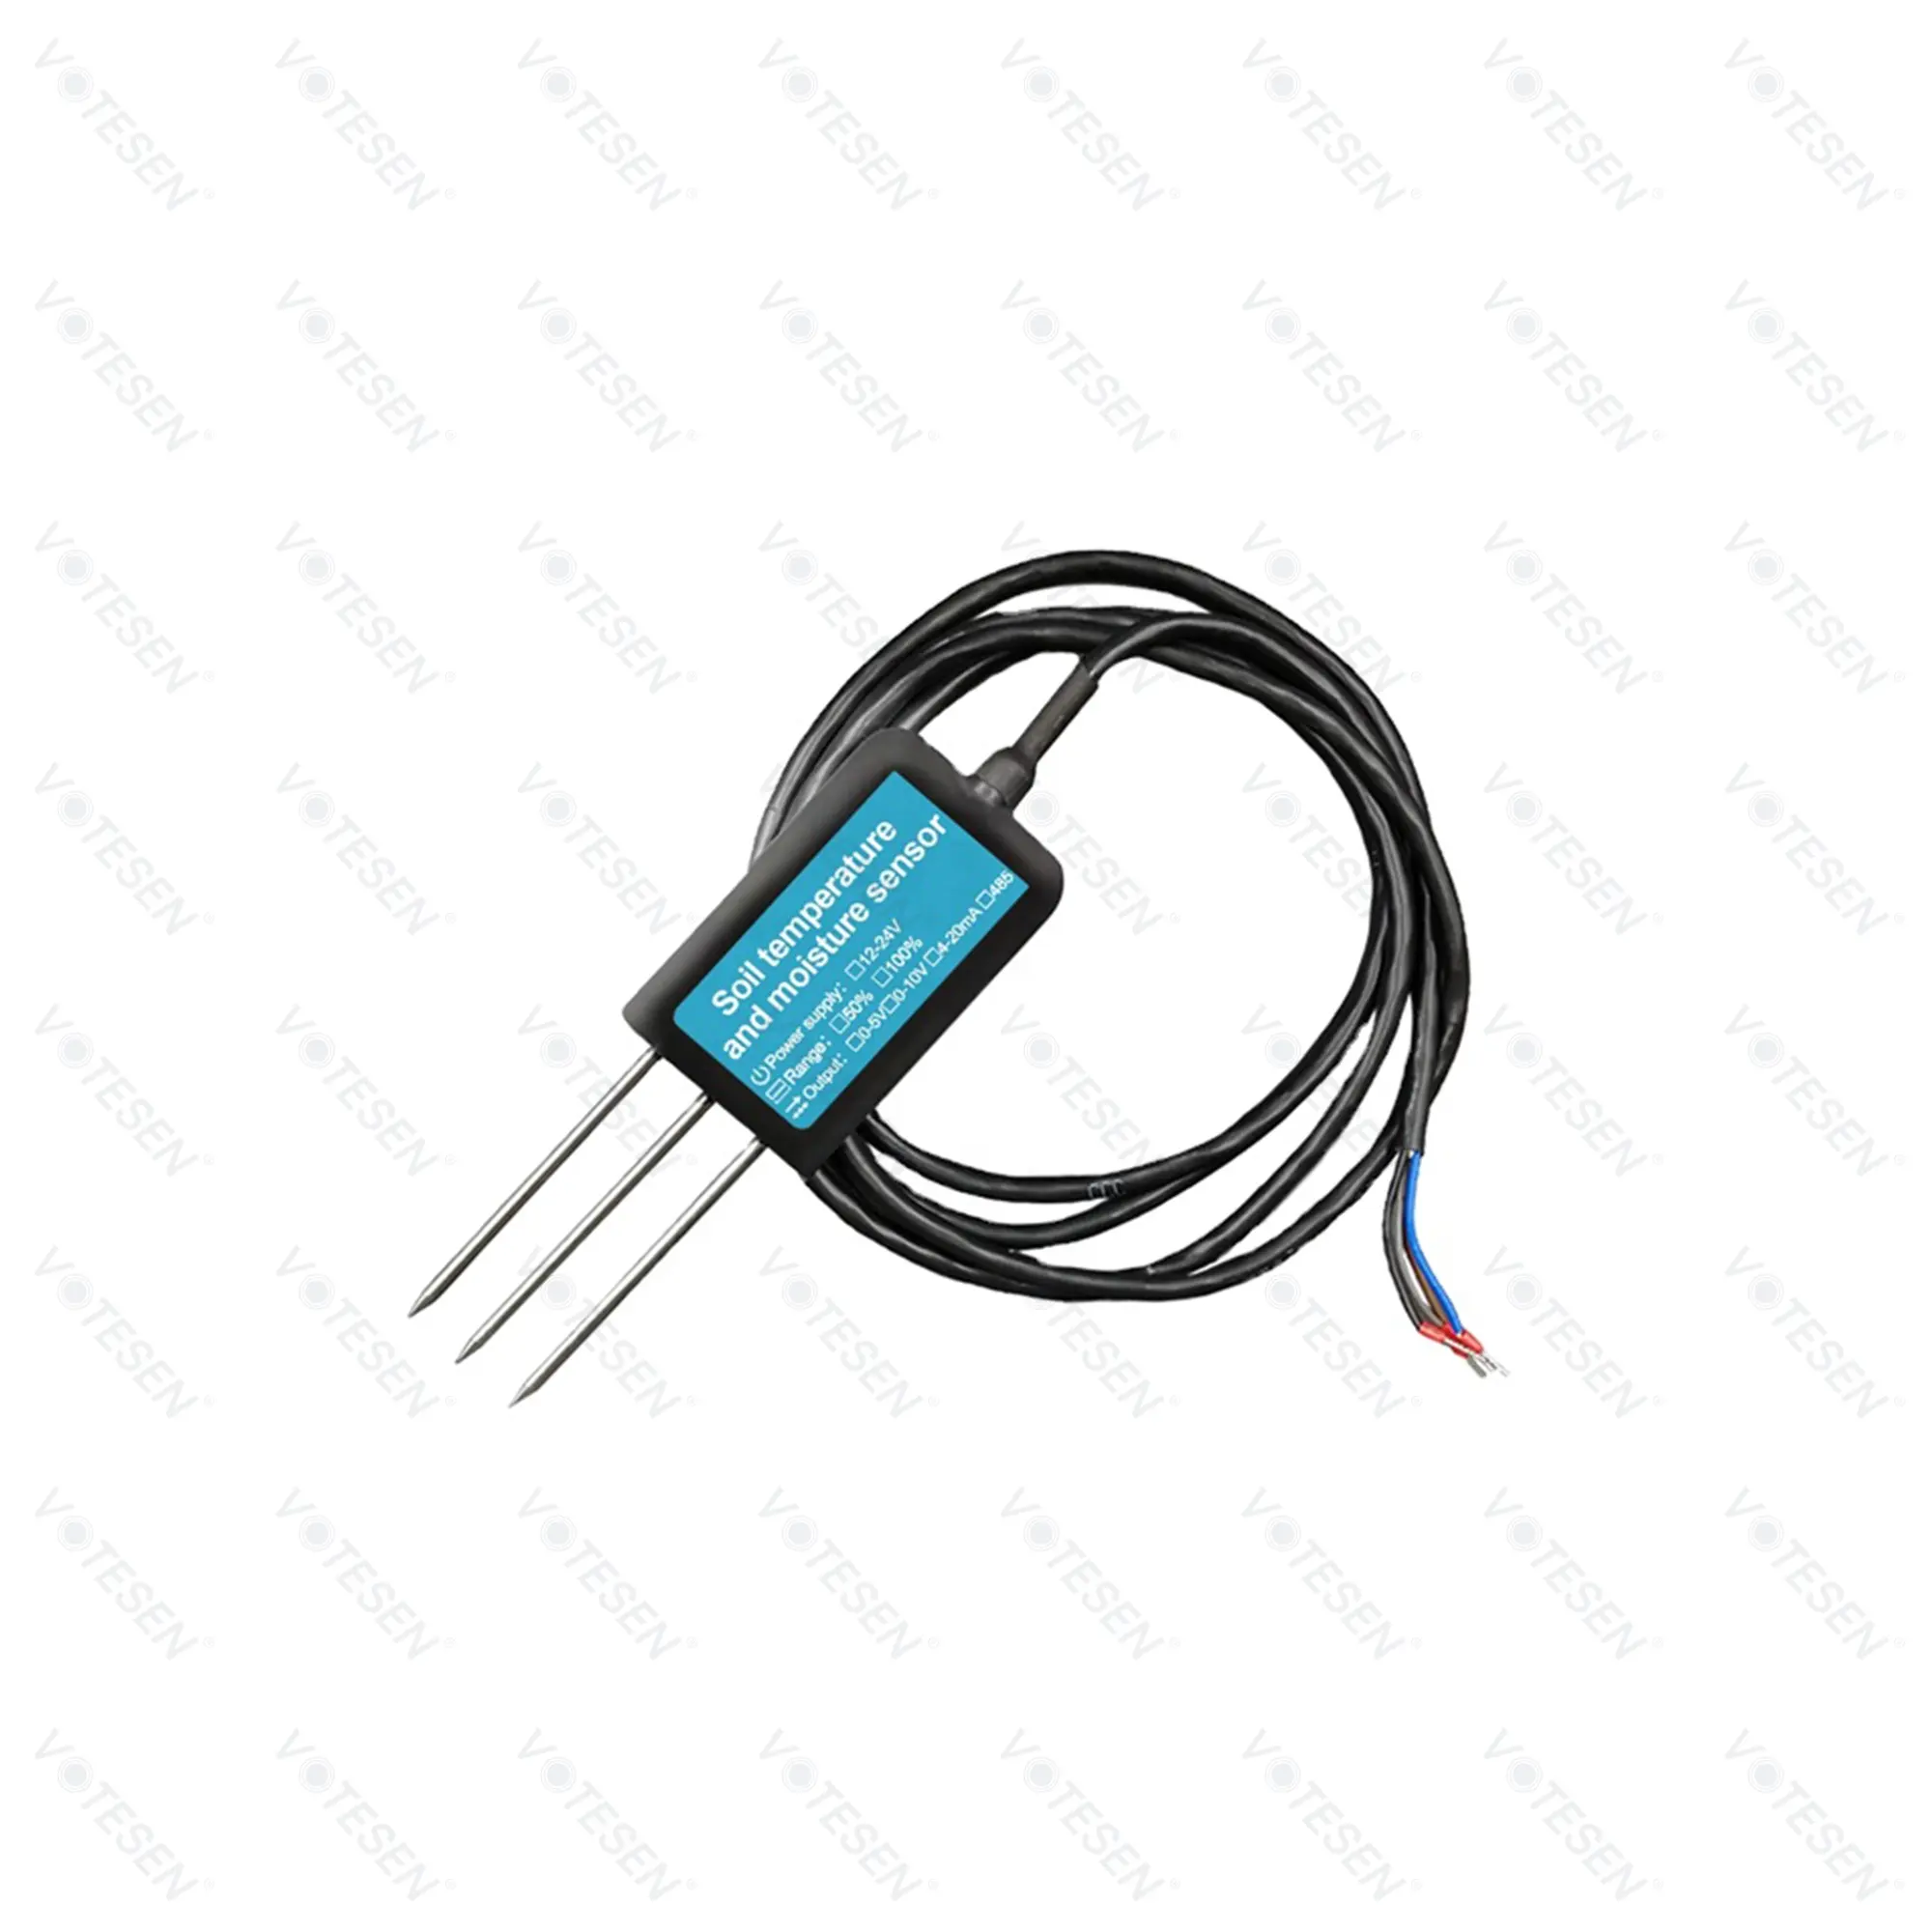 VTS500 Agriculture Soil Analyzer Sensor Temperature Humidity Electrical Conductivity